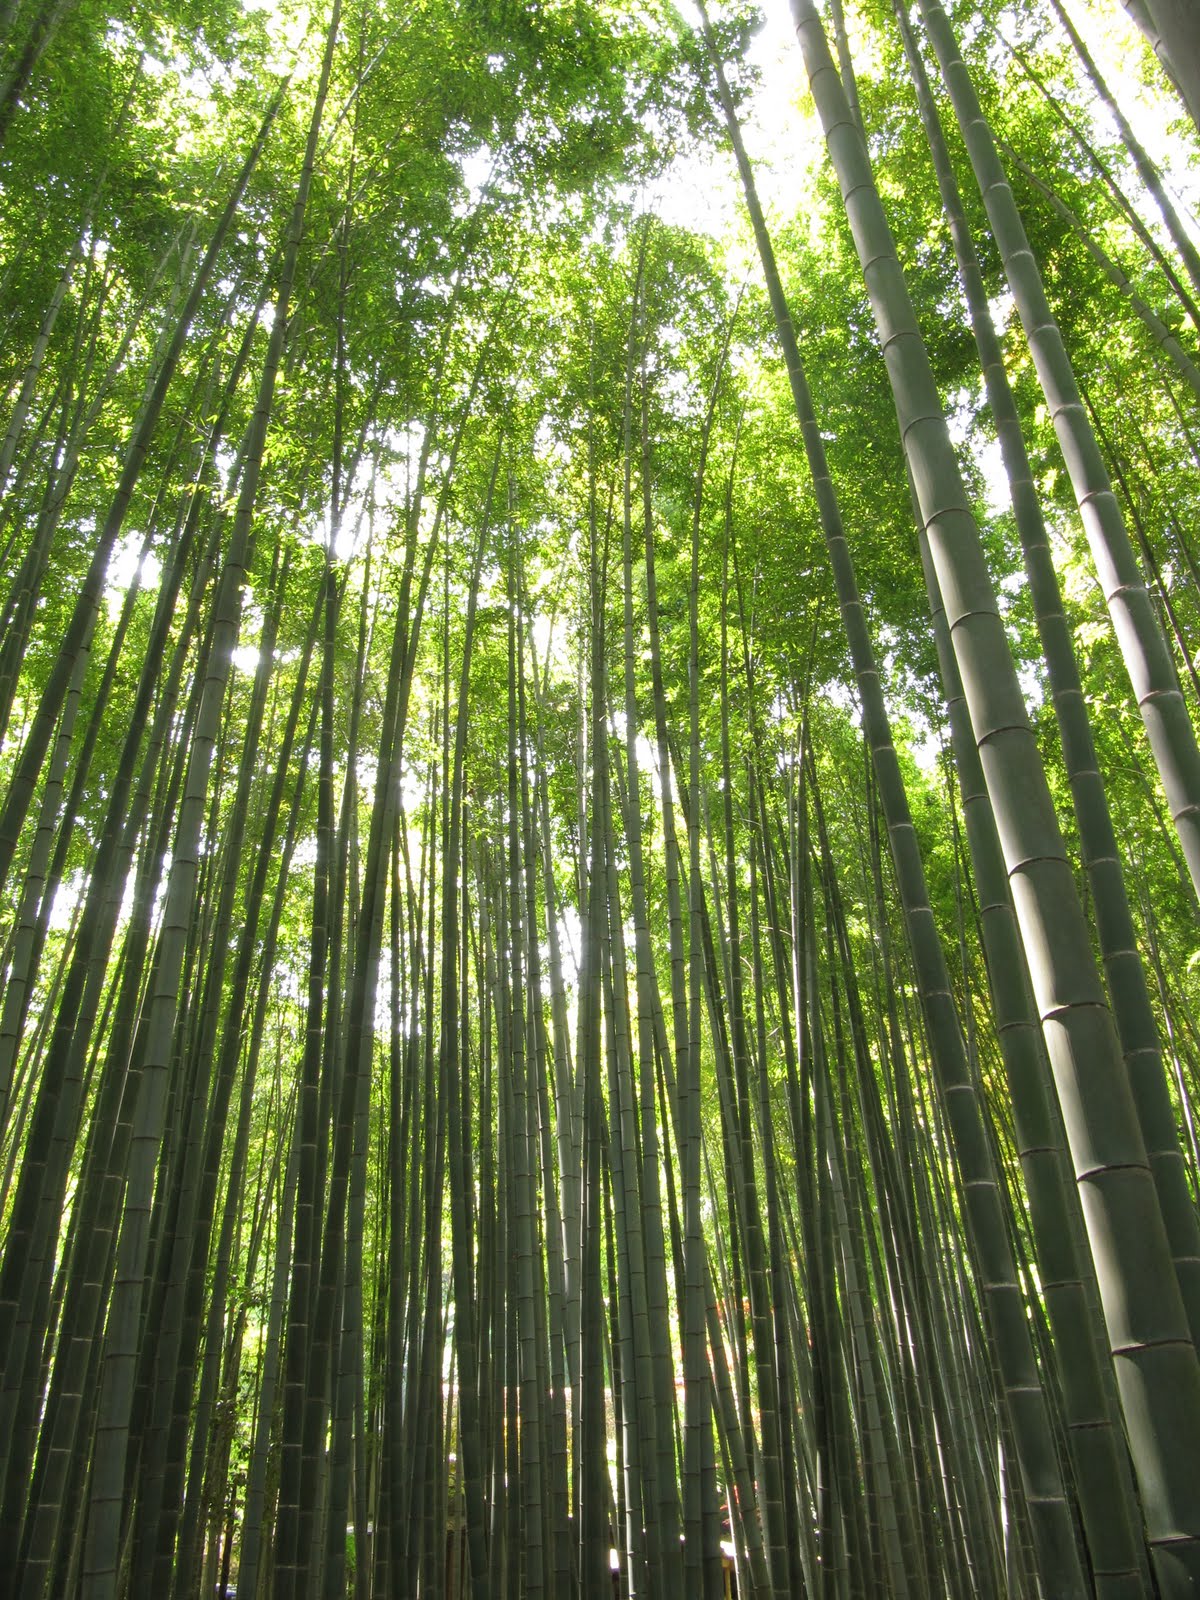 Being Under The Canopy Of A Bamboo Forest Is A Very Unique Experience